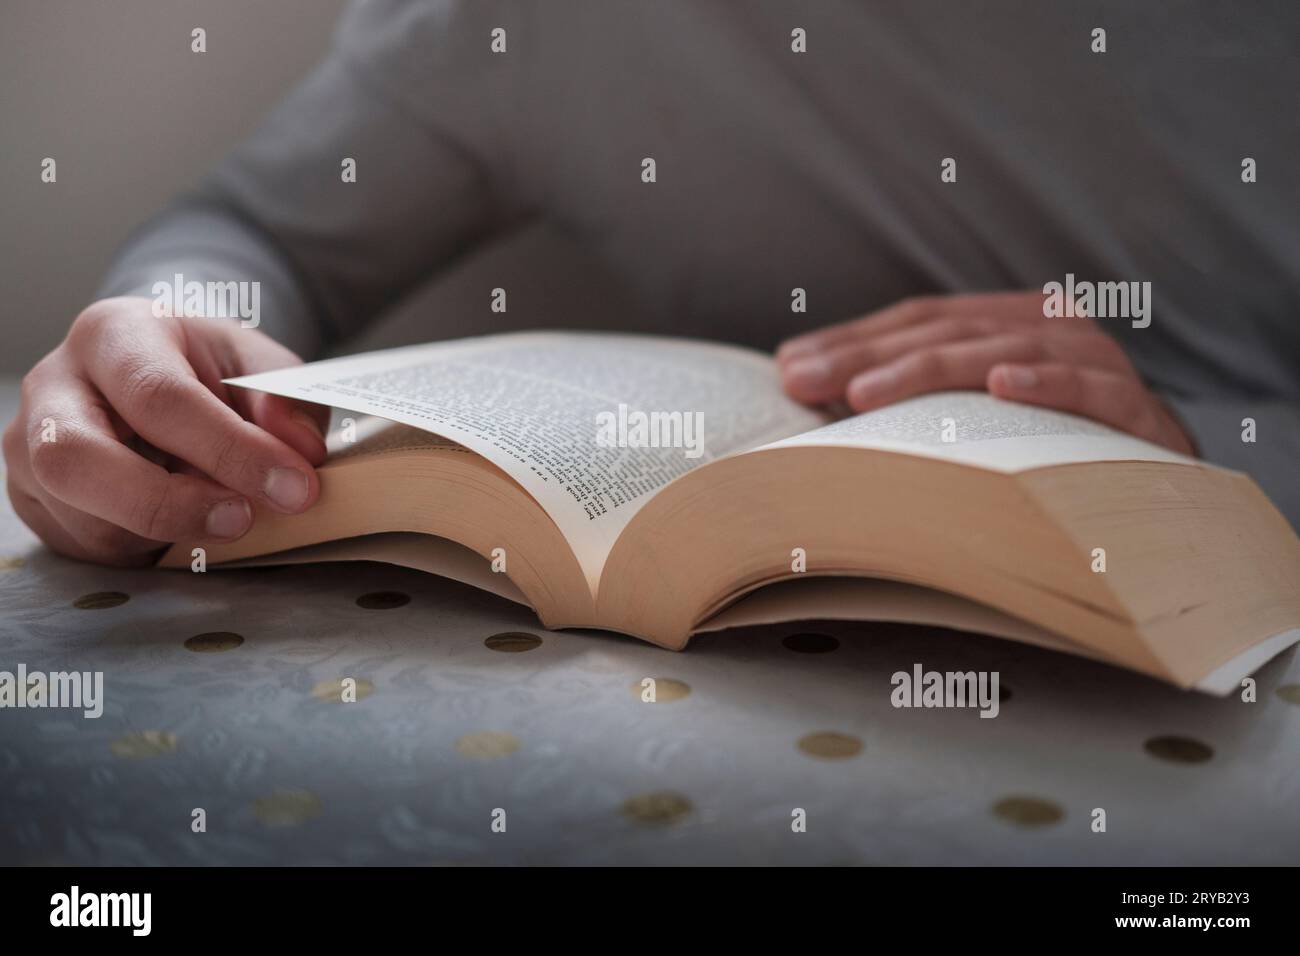 Woman reading a book-close-up Stock Photo